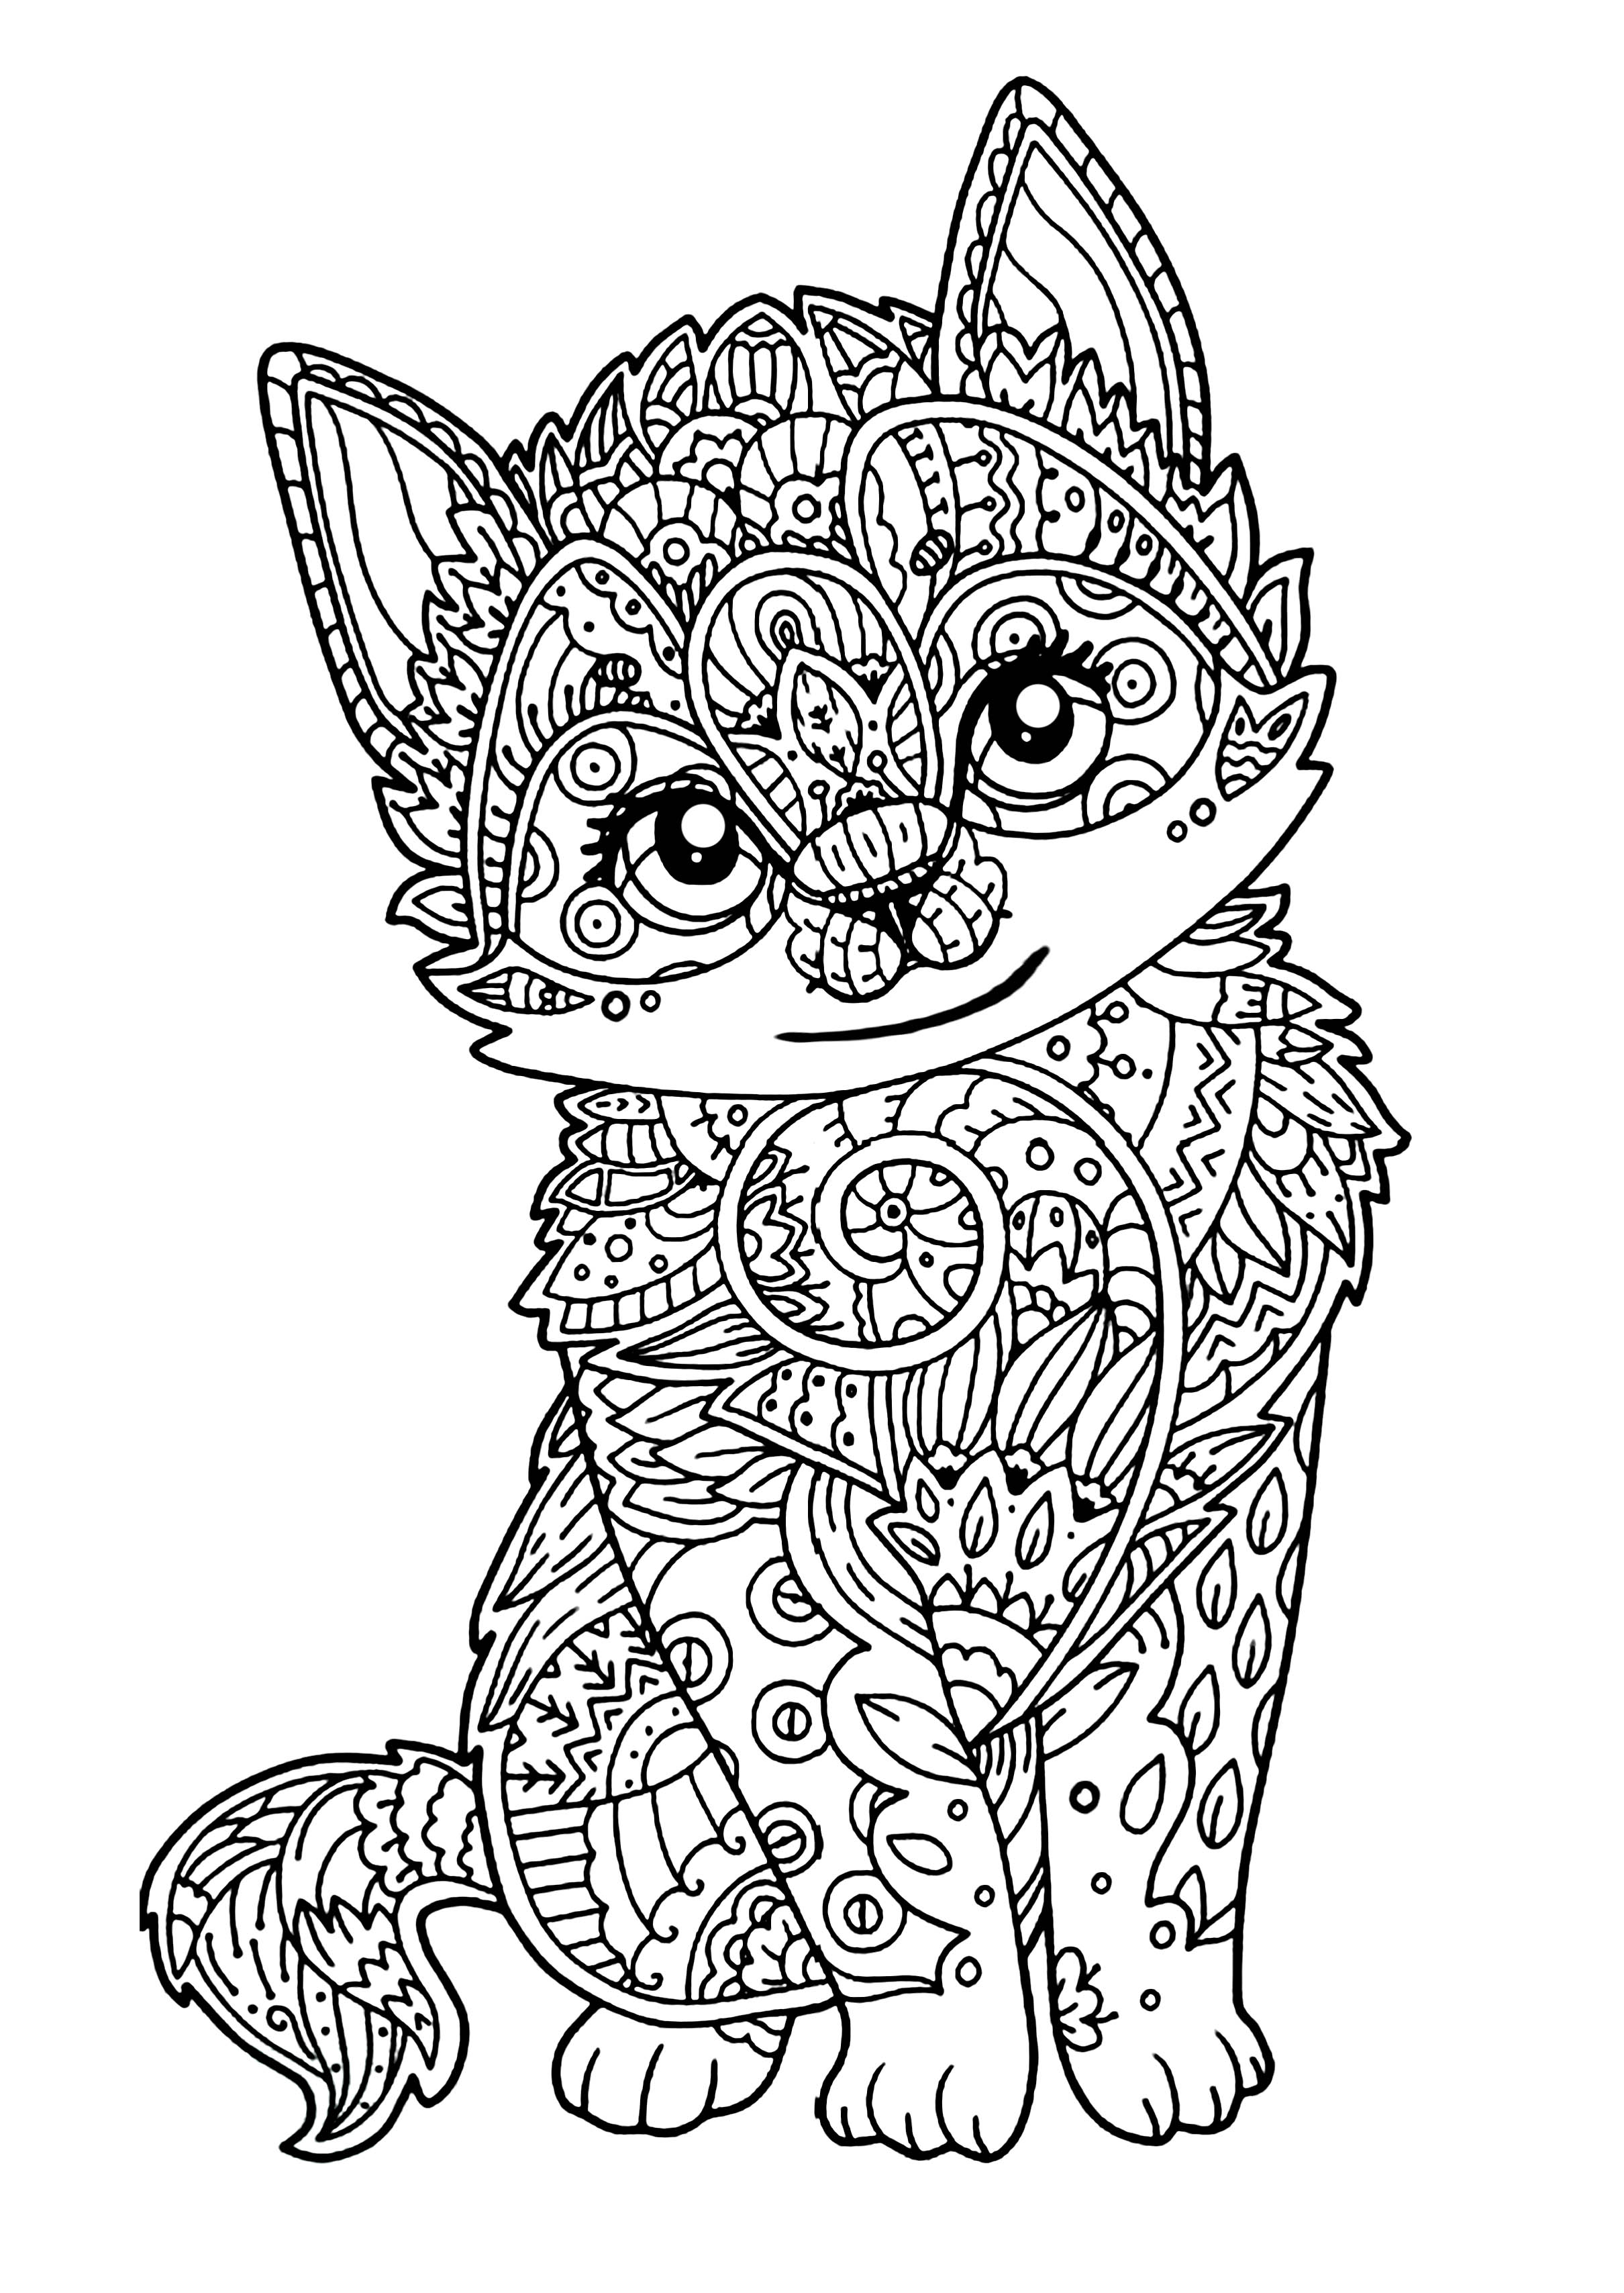 Download Cute kitten - Cats Adult Coloring Pages